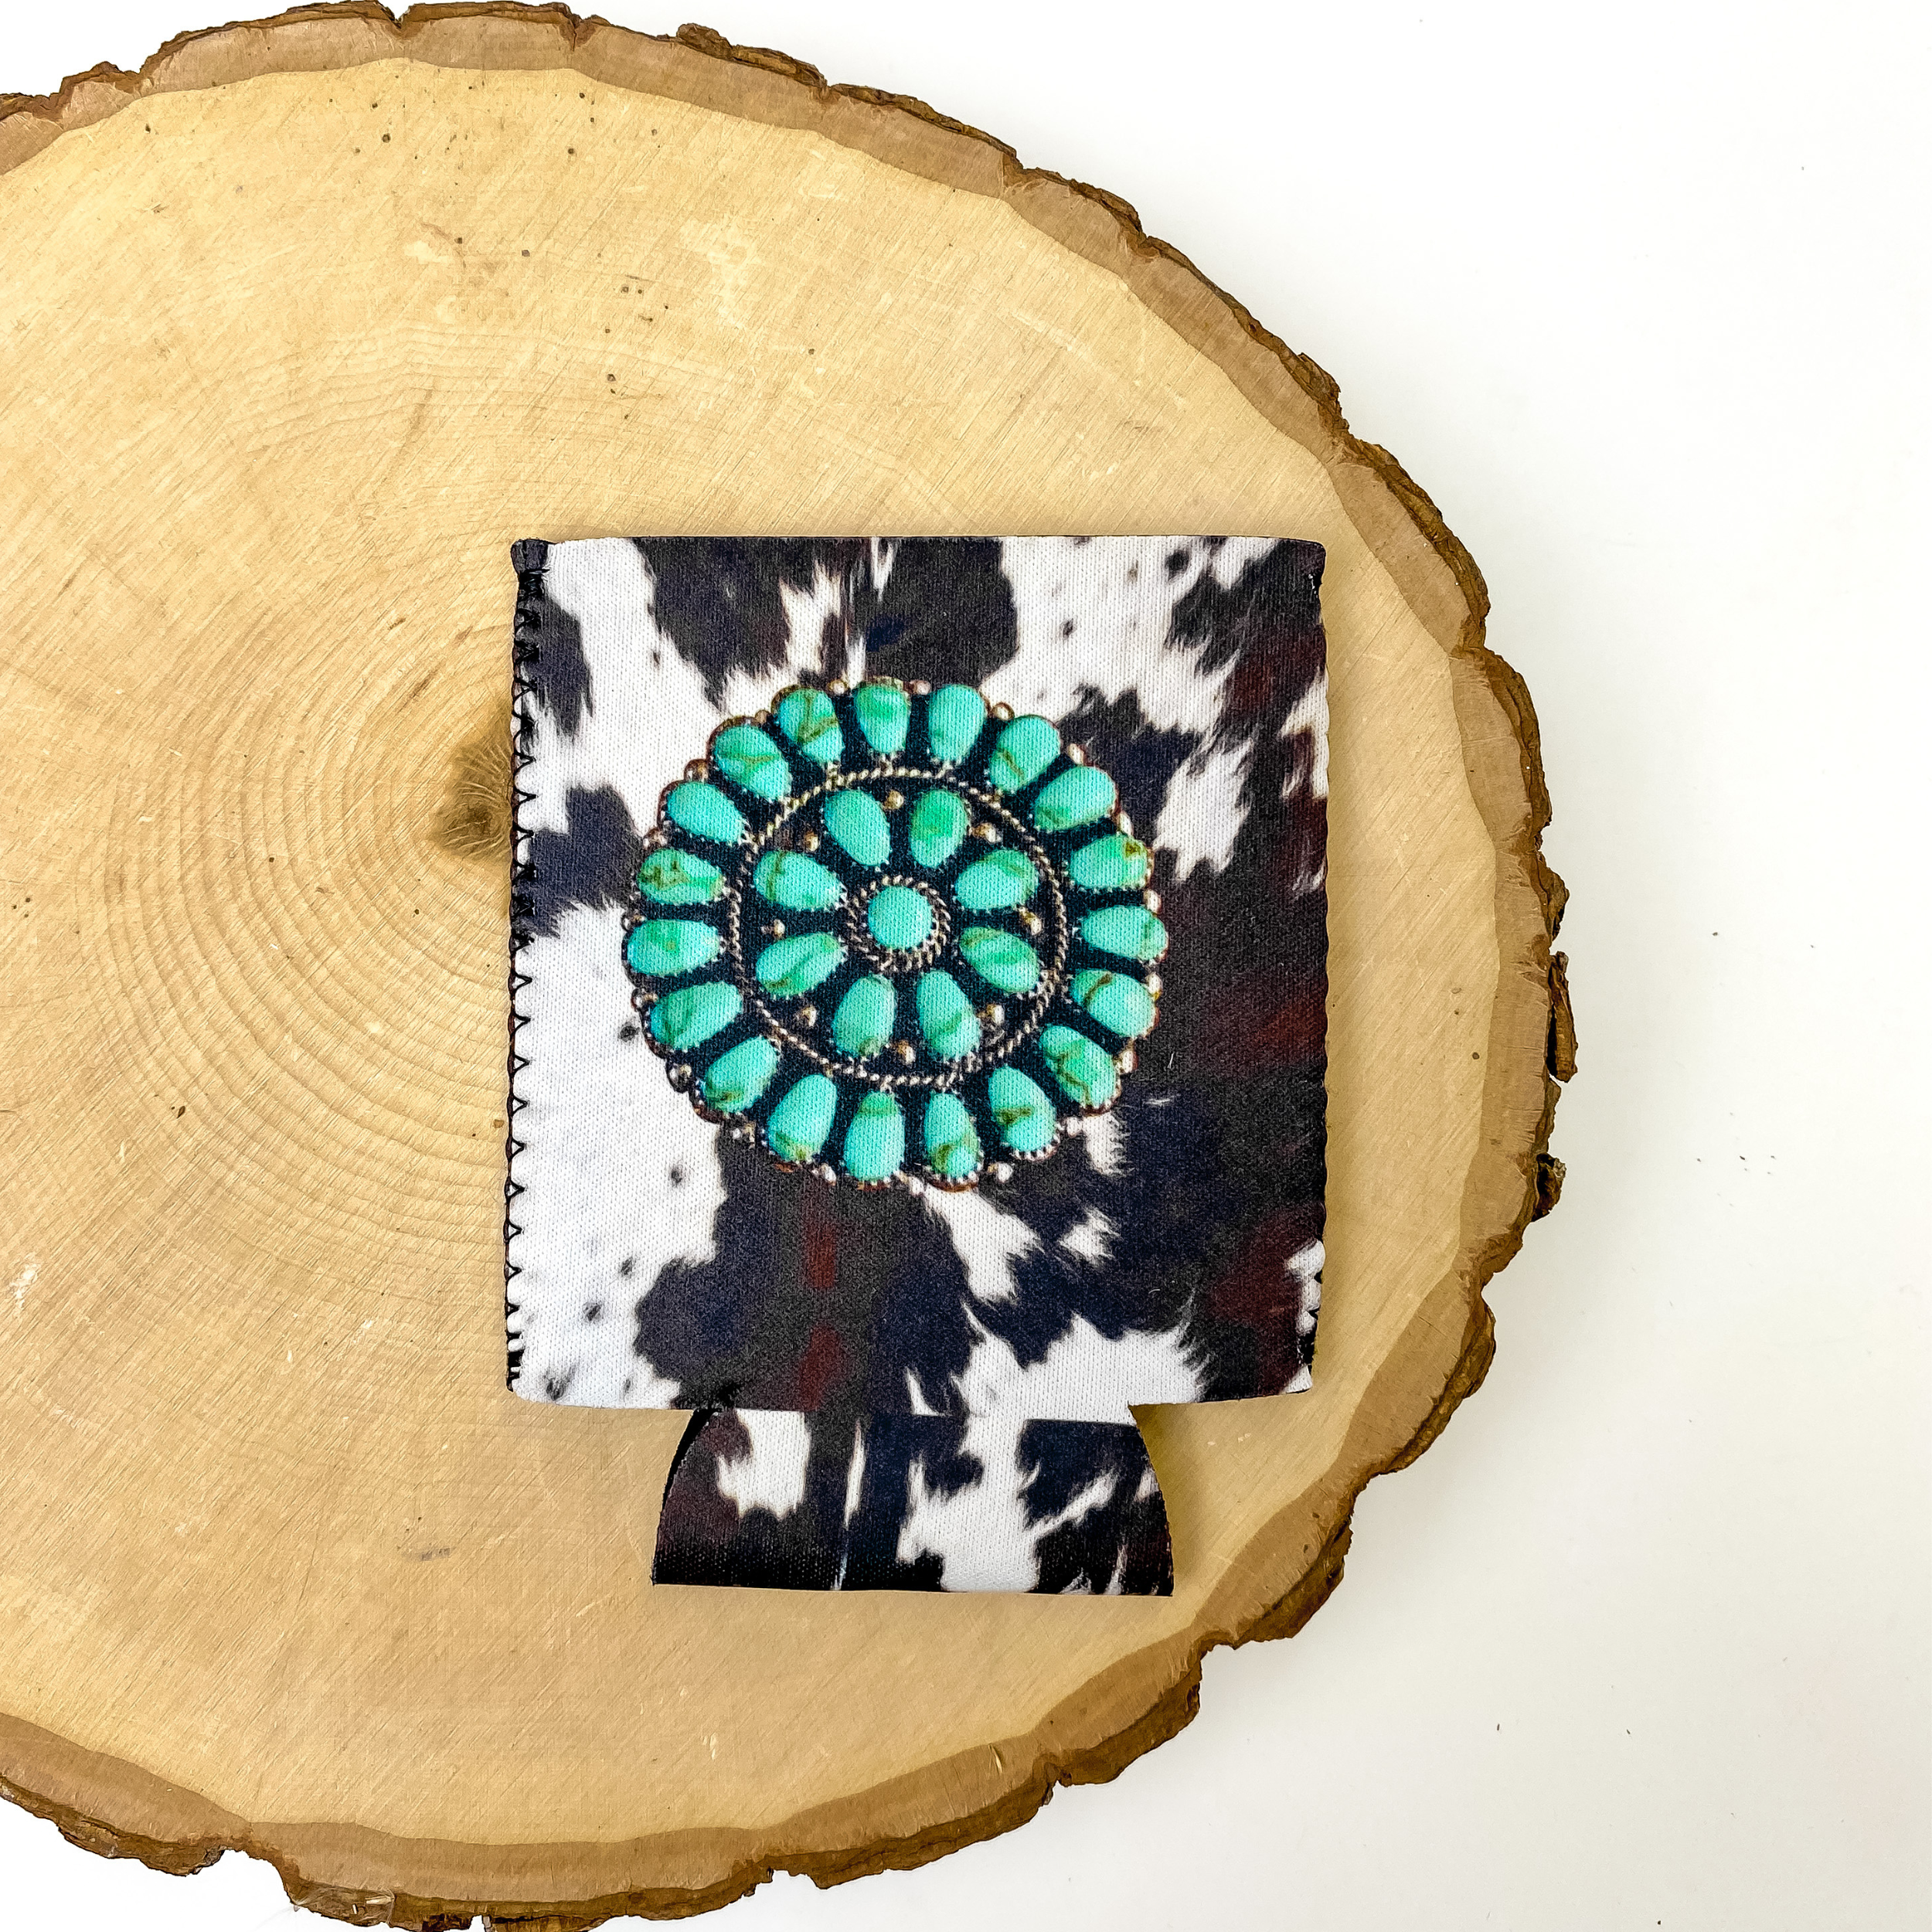 Cow print design with a turquoise design in the center of koozie. This koozie is pictured on a piece of wood on a white background.